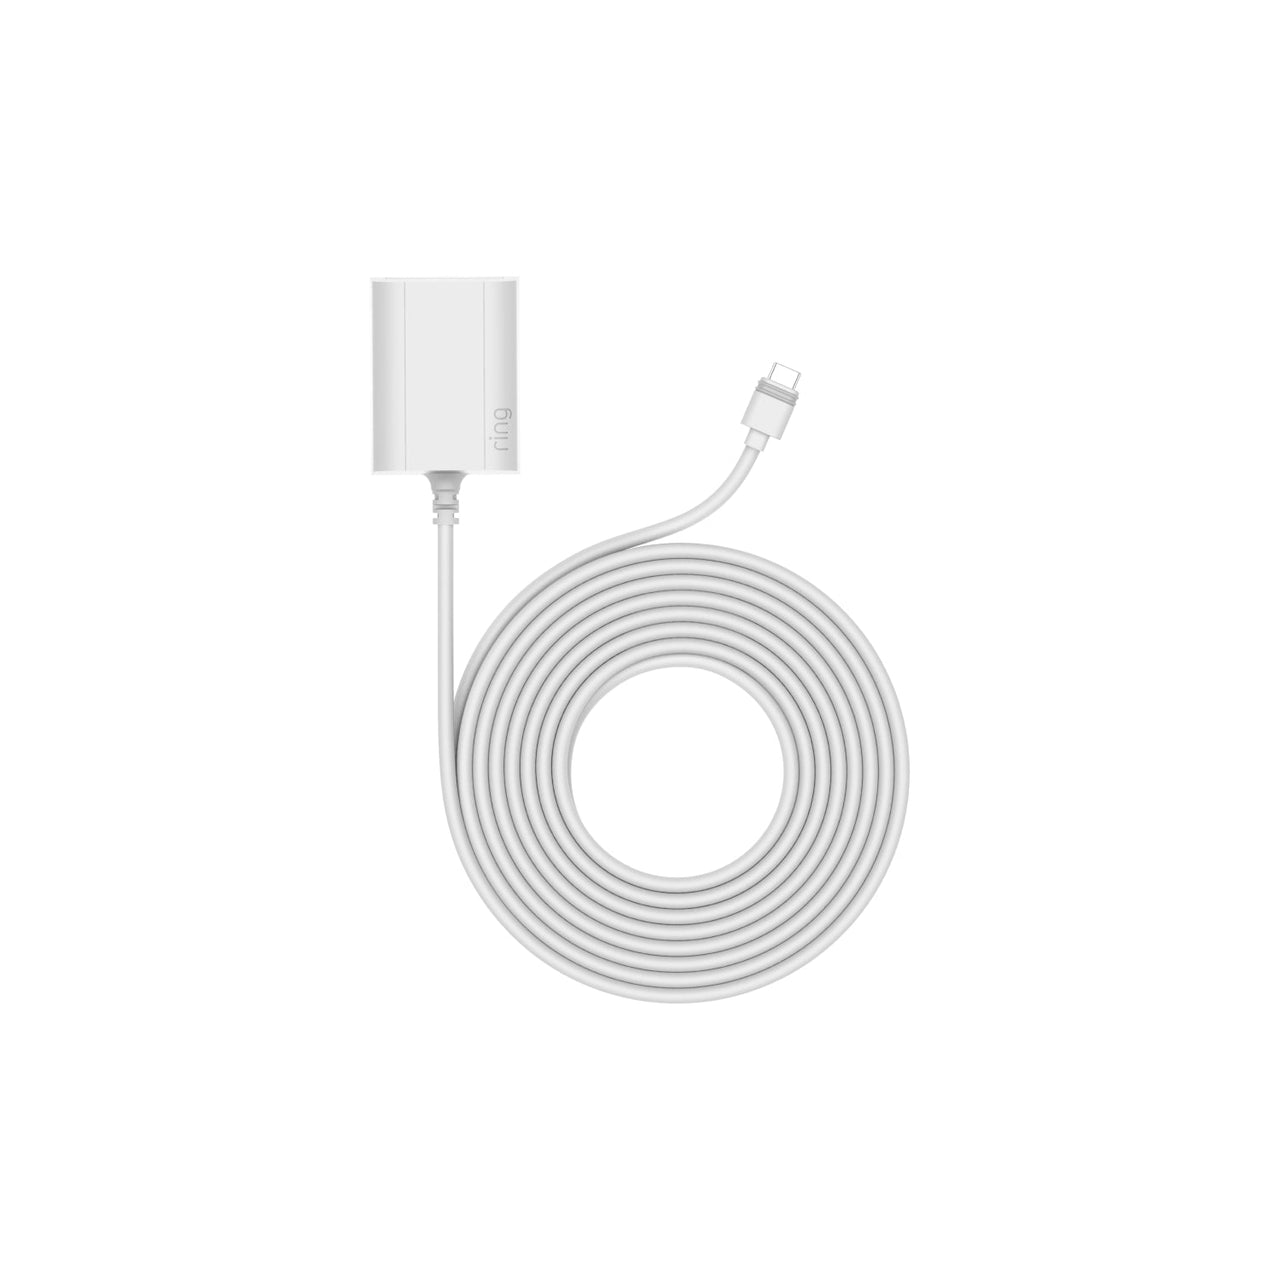 products/ring_indoor_outdoor_power_adapter_usb-c_indoor_wht_1500x1500_1_6ff9dad8-95c0-414d-91bc-a866509c660b.jpg